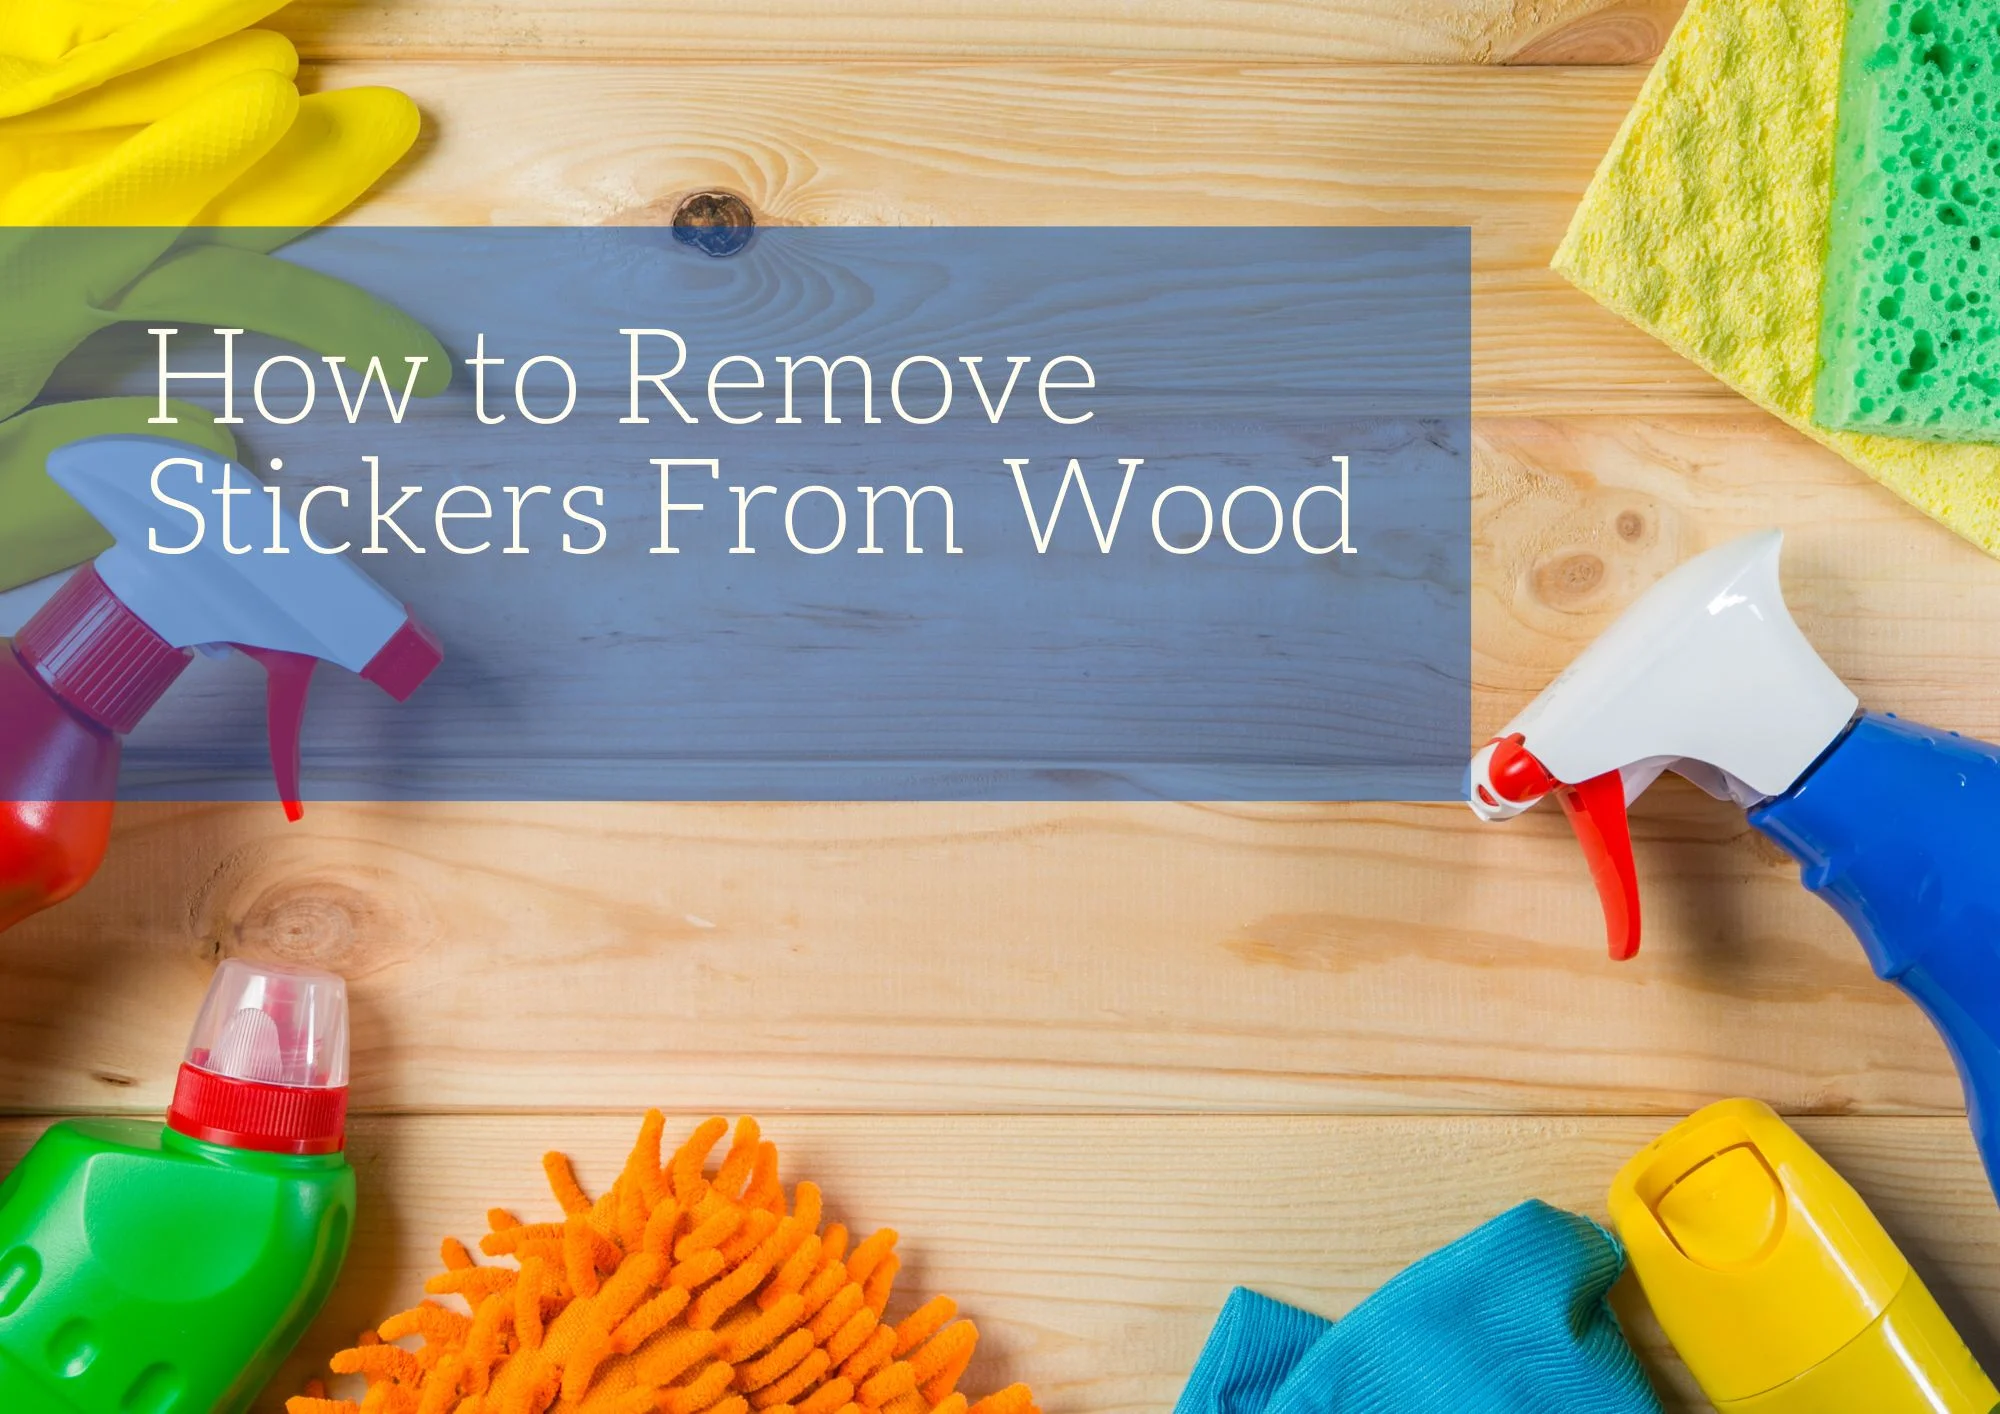 How to Remove Stickers From Wood